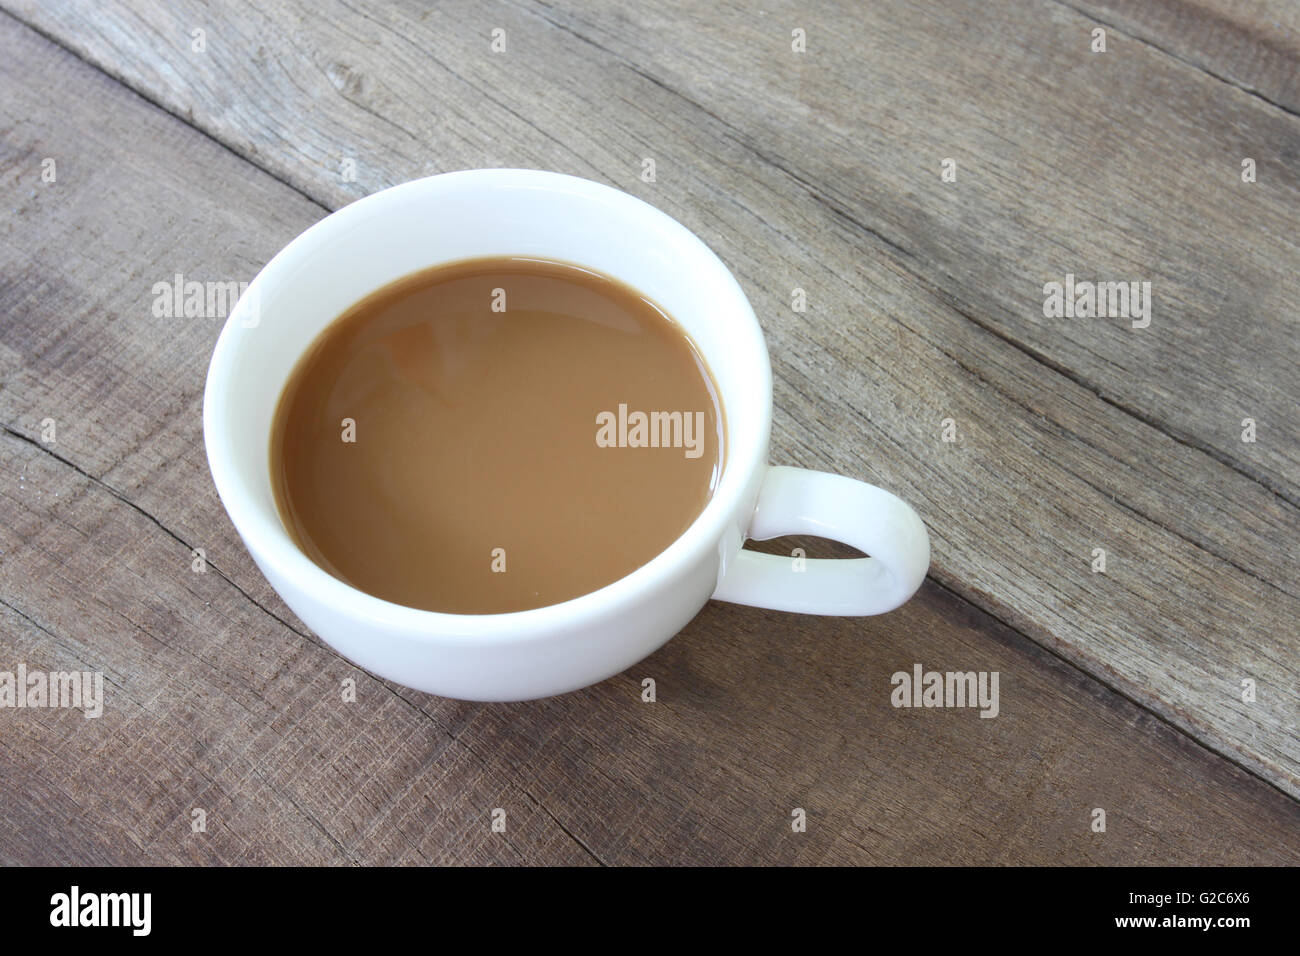 White coffee cup on a wooden floor and concept for beverage. Stock Photo